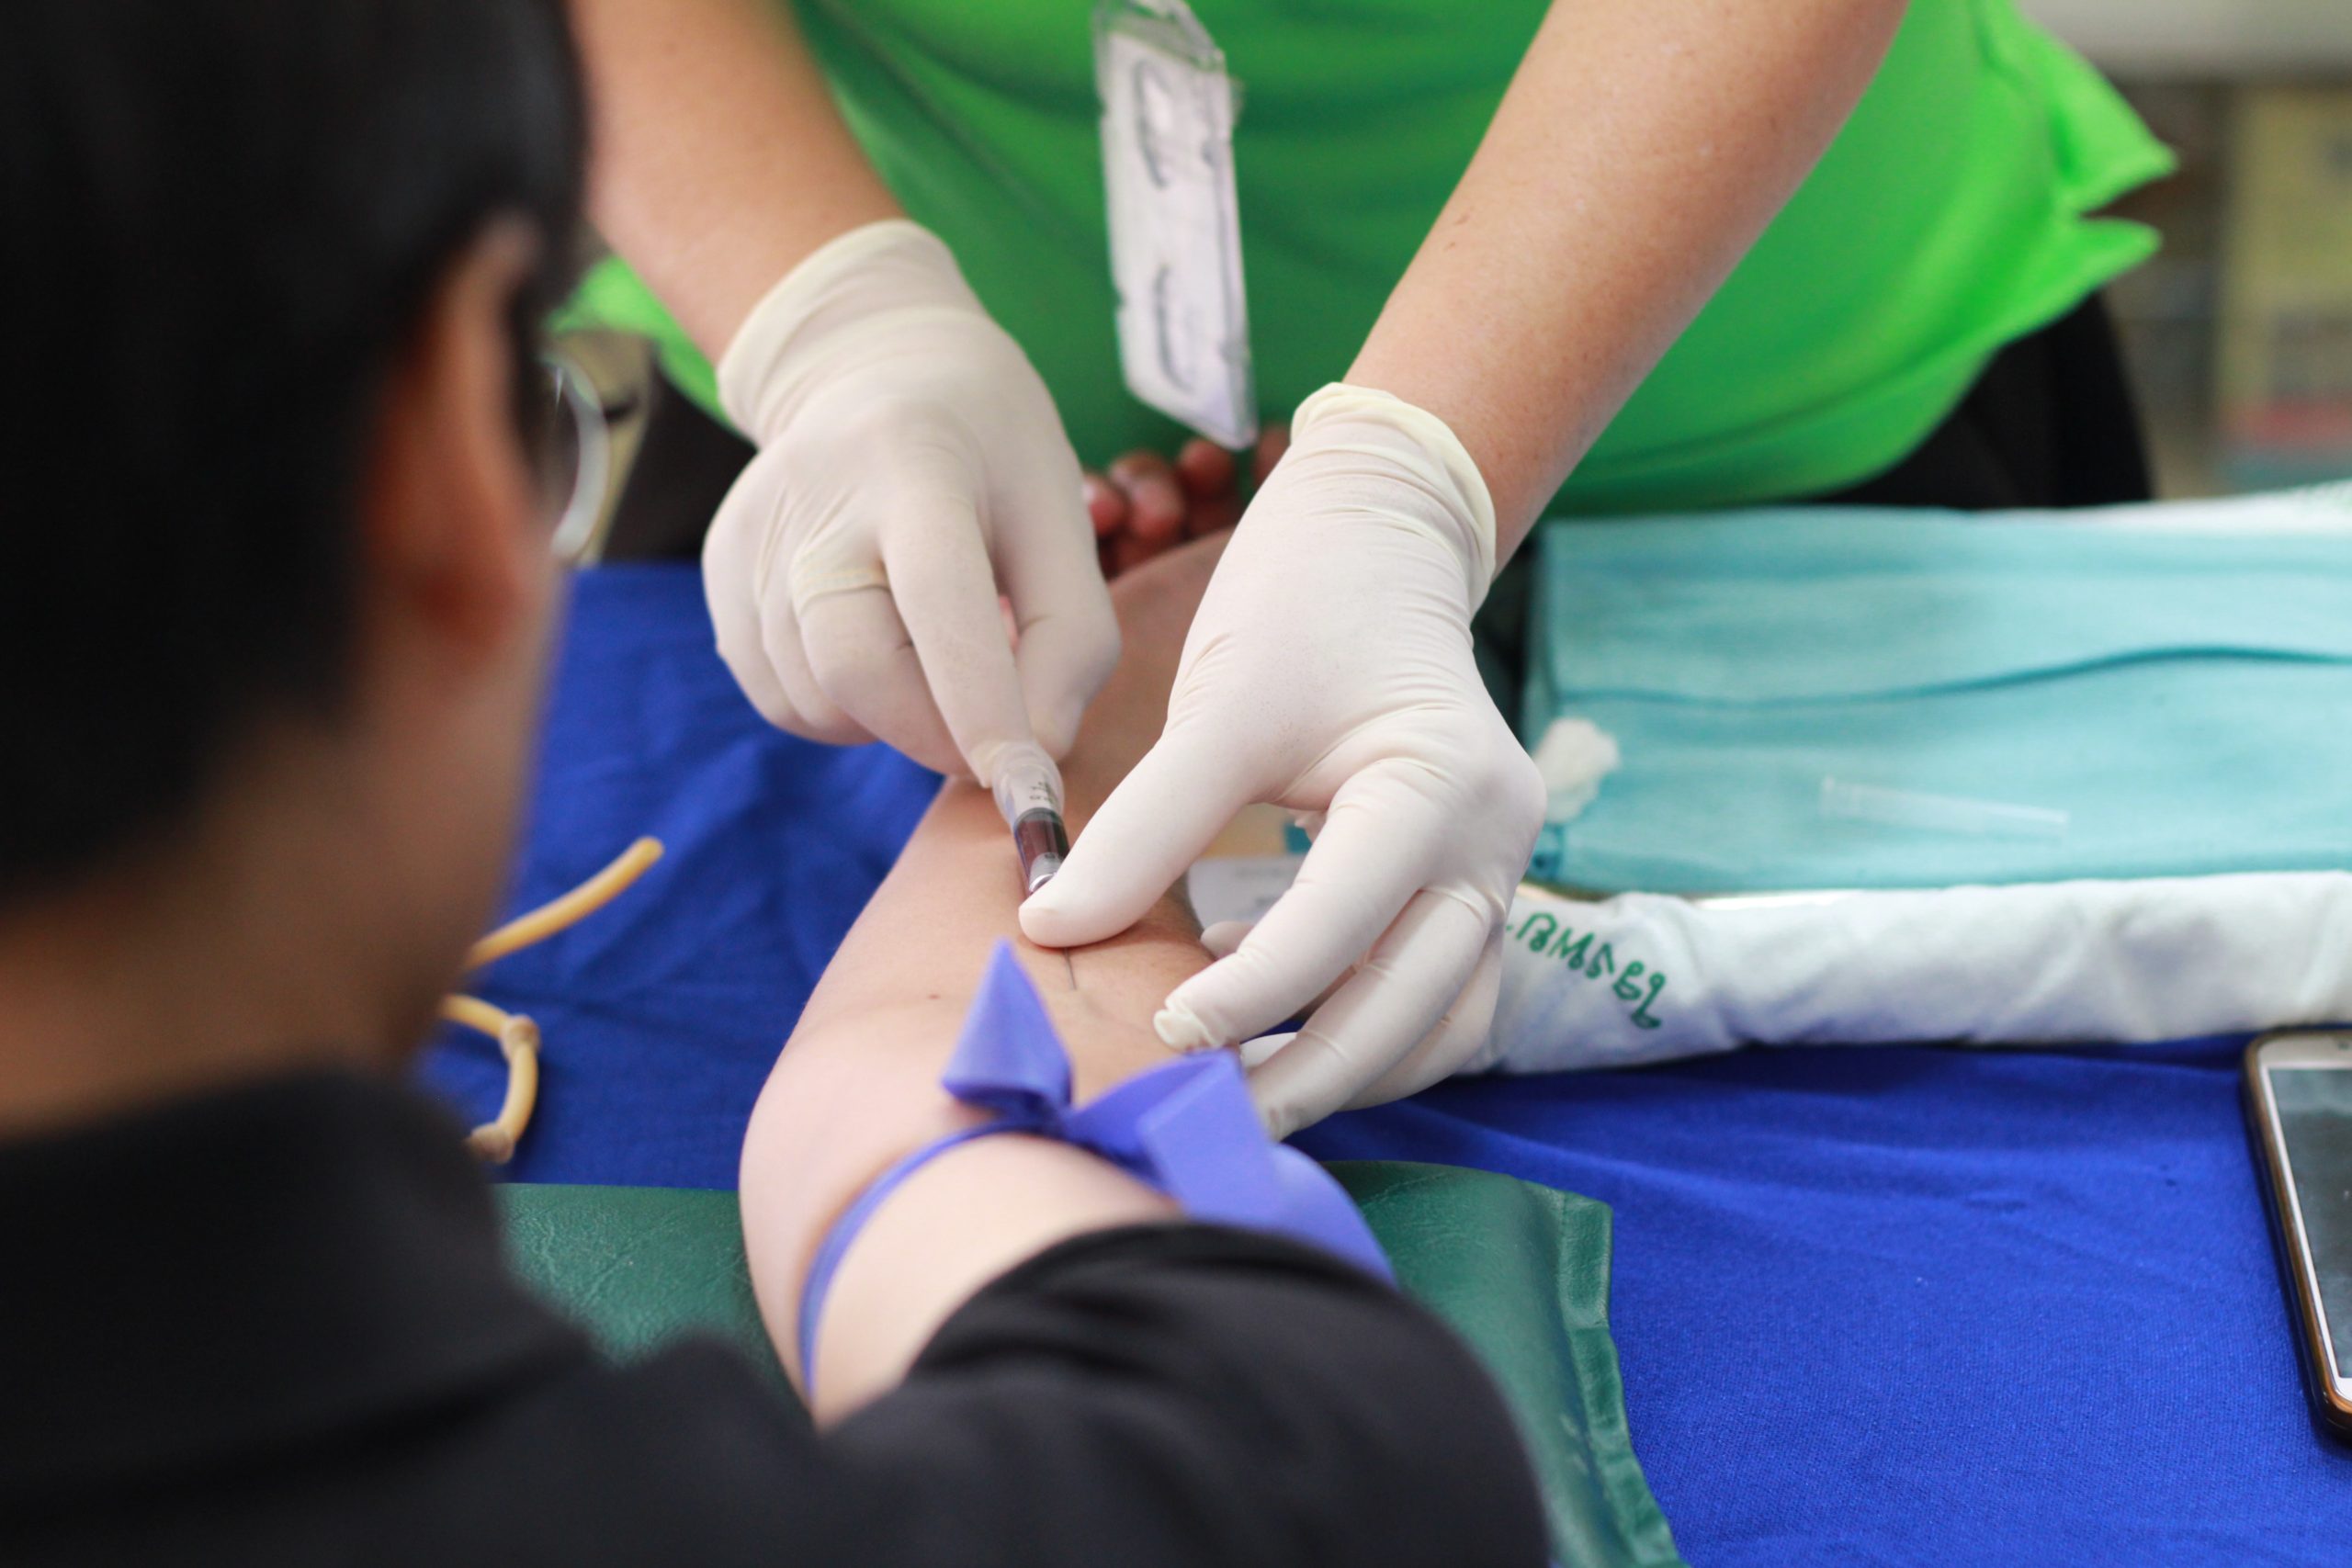 Phlebotomist with white gloves inserting needle in man's arm for blood work